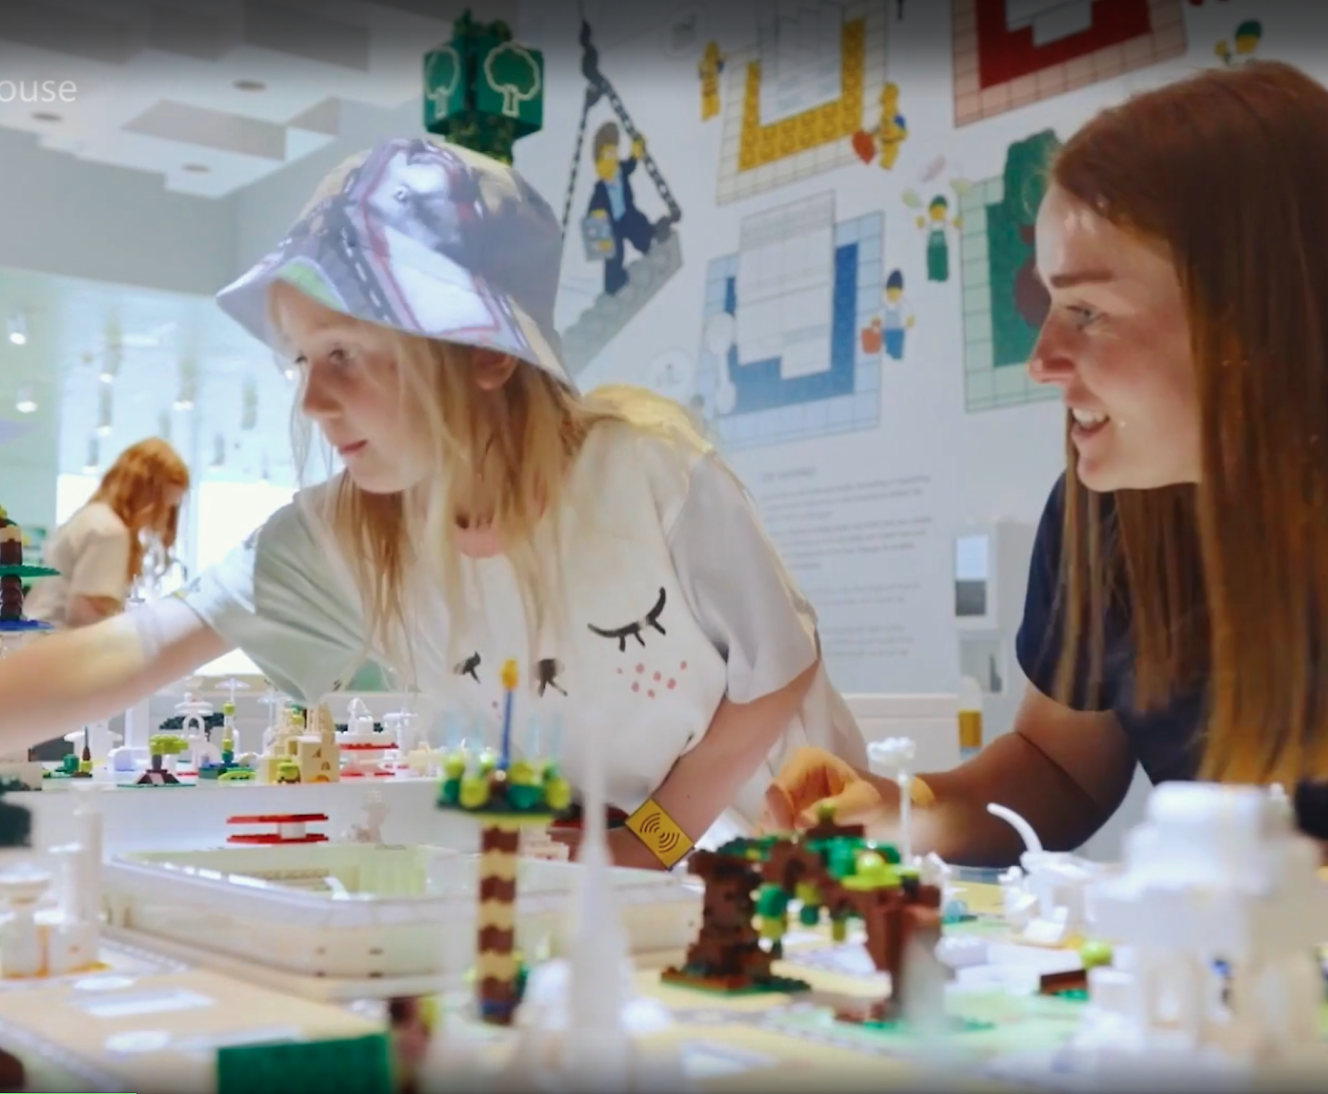 Two women engaging with a lego model at an interactive exhibit, one wearing a face shield.